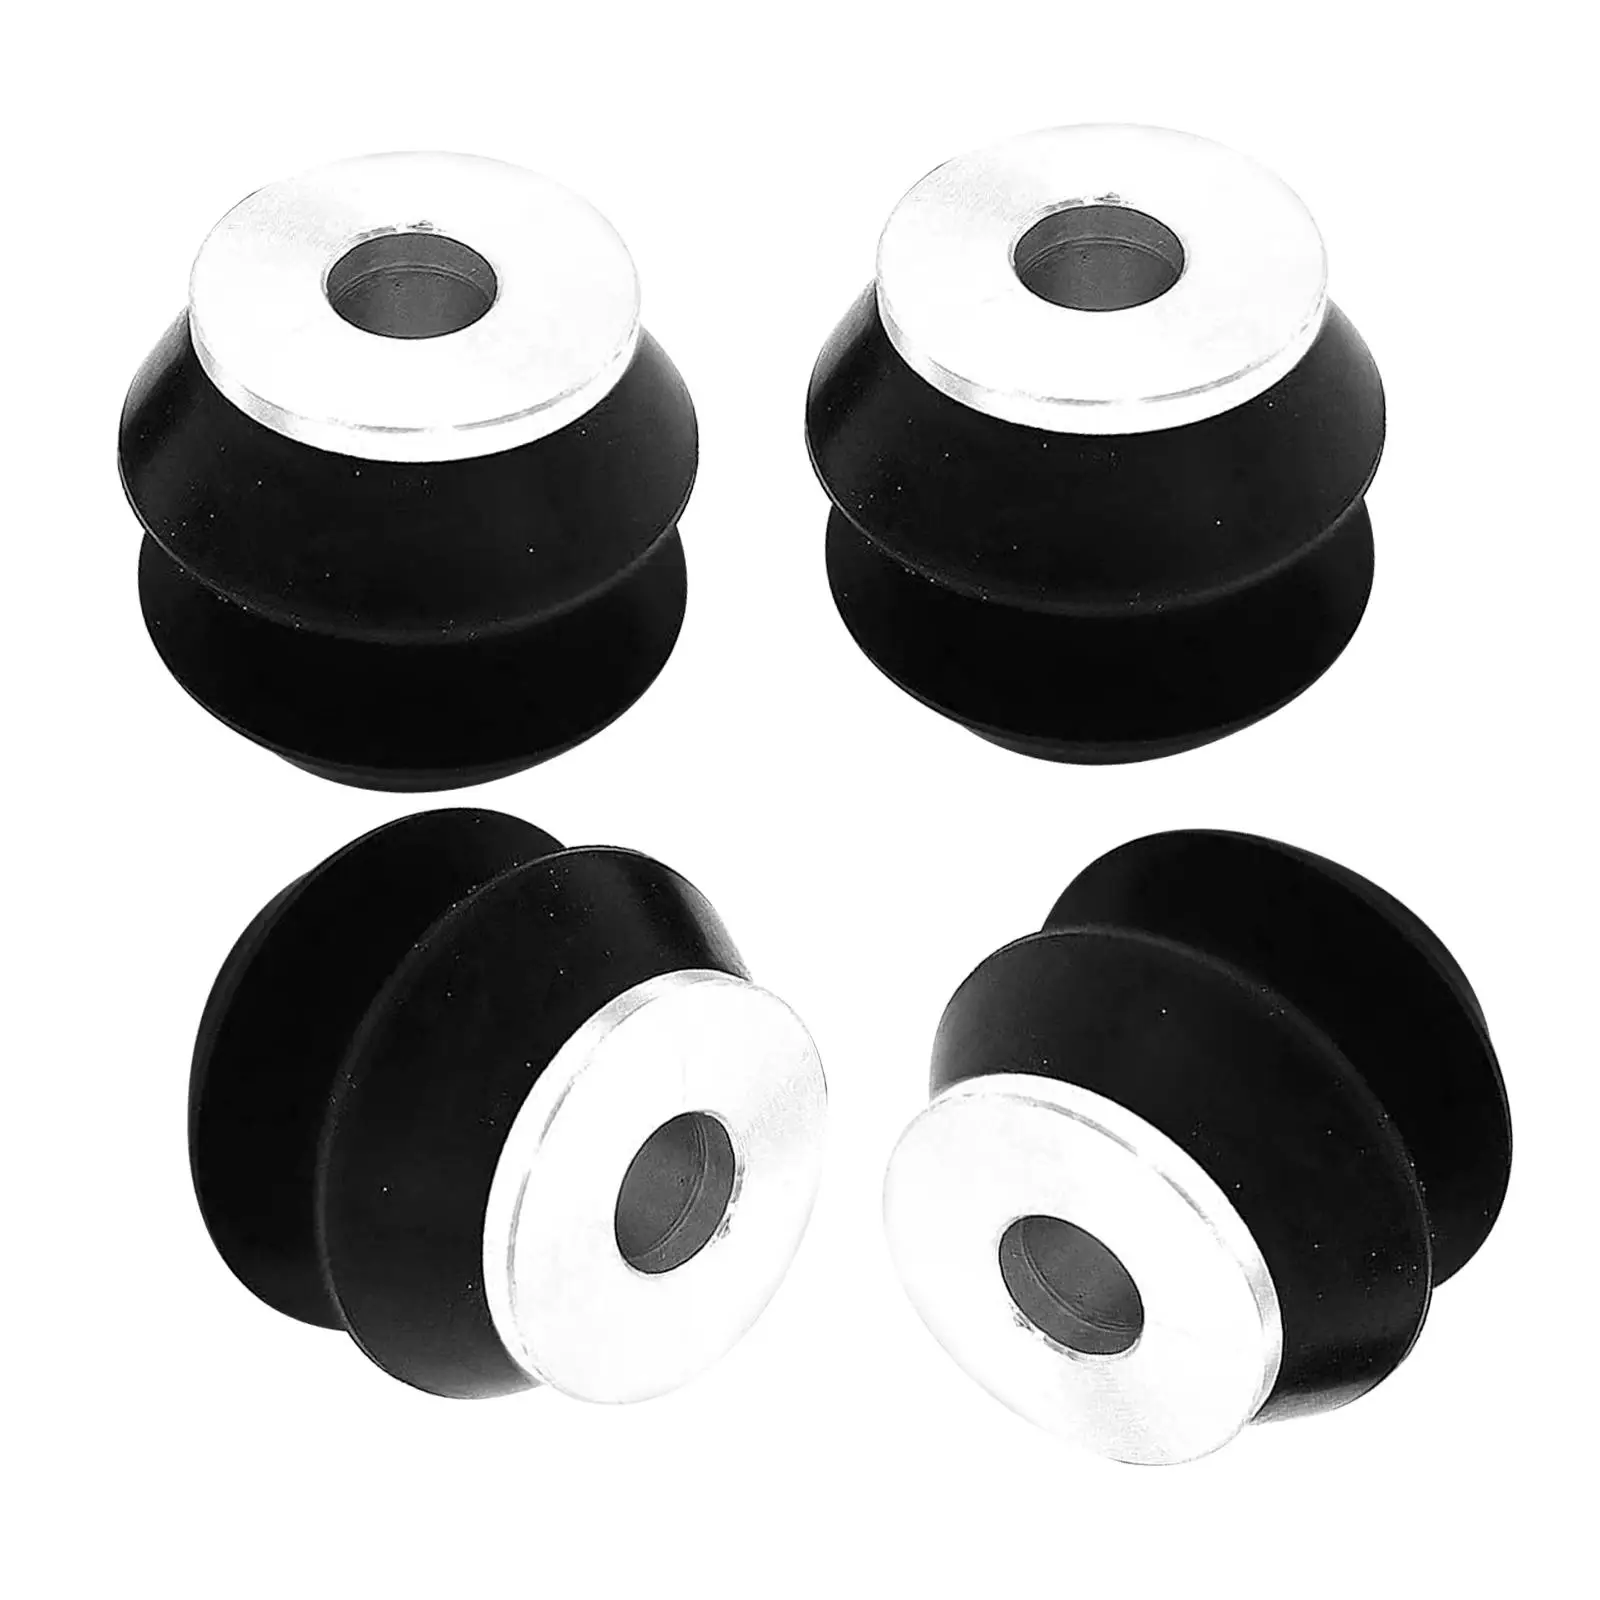 Ficm Mounting Bushing Set (Fuel Injection Control Module) VT275 VT365 for Ford 6.0L Accessories High Quality